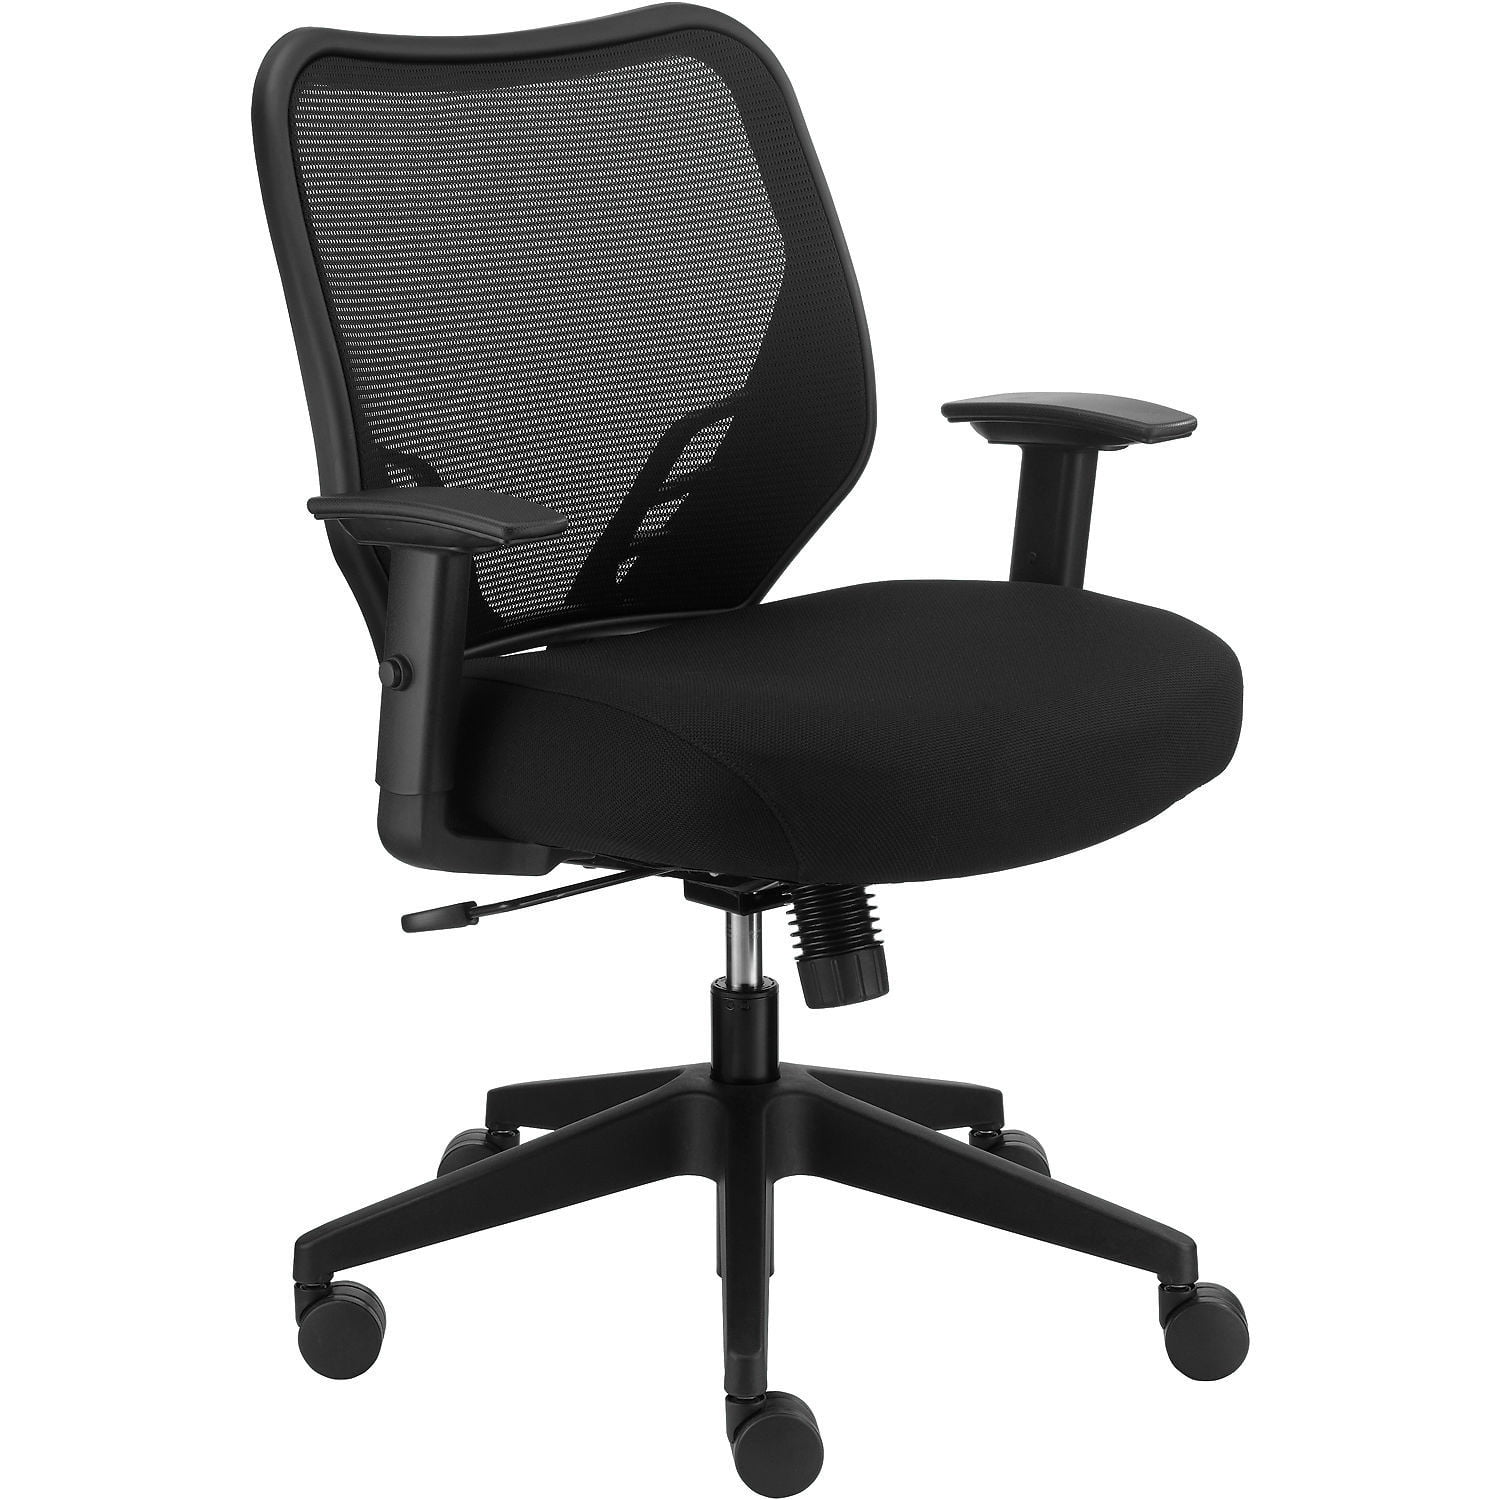 Details about   Global Airflow Mesh Back Leather Manager Chair Black 9339BK 492943 